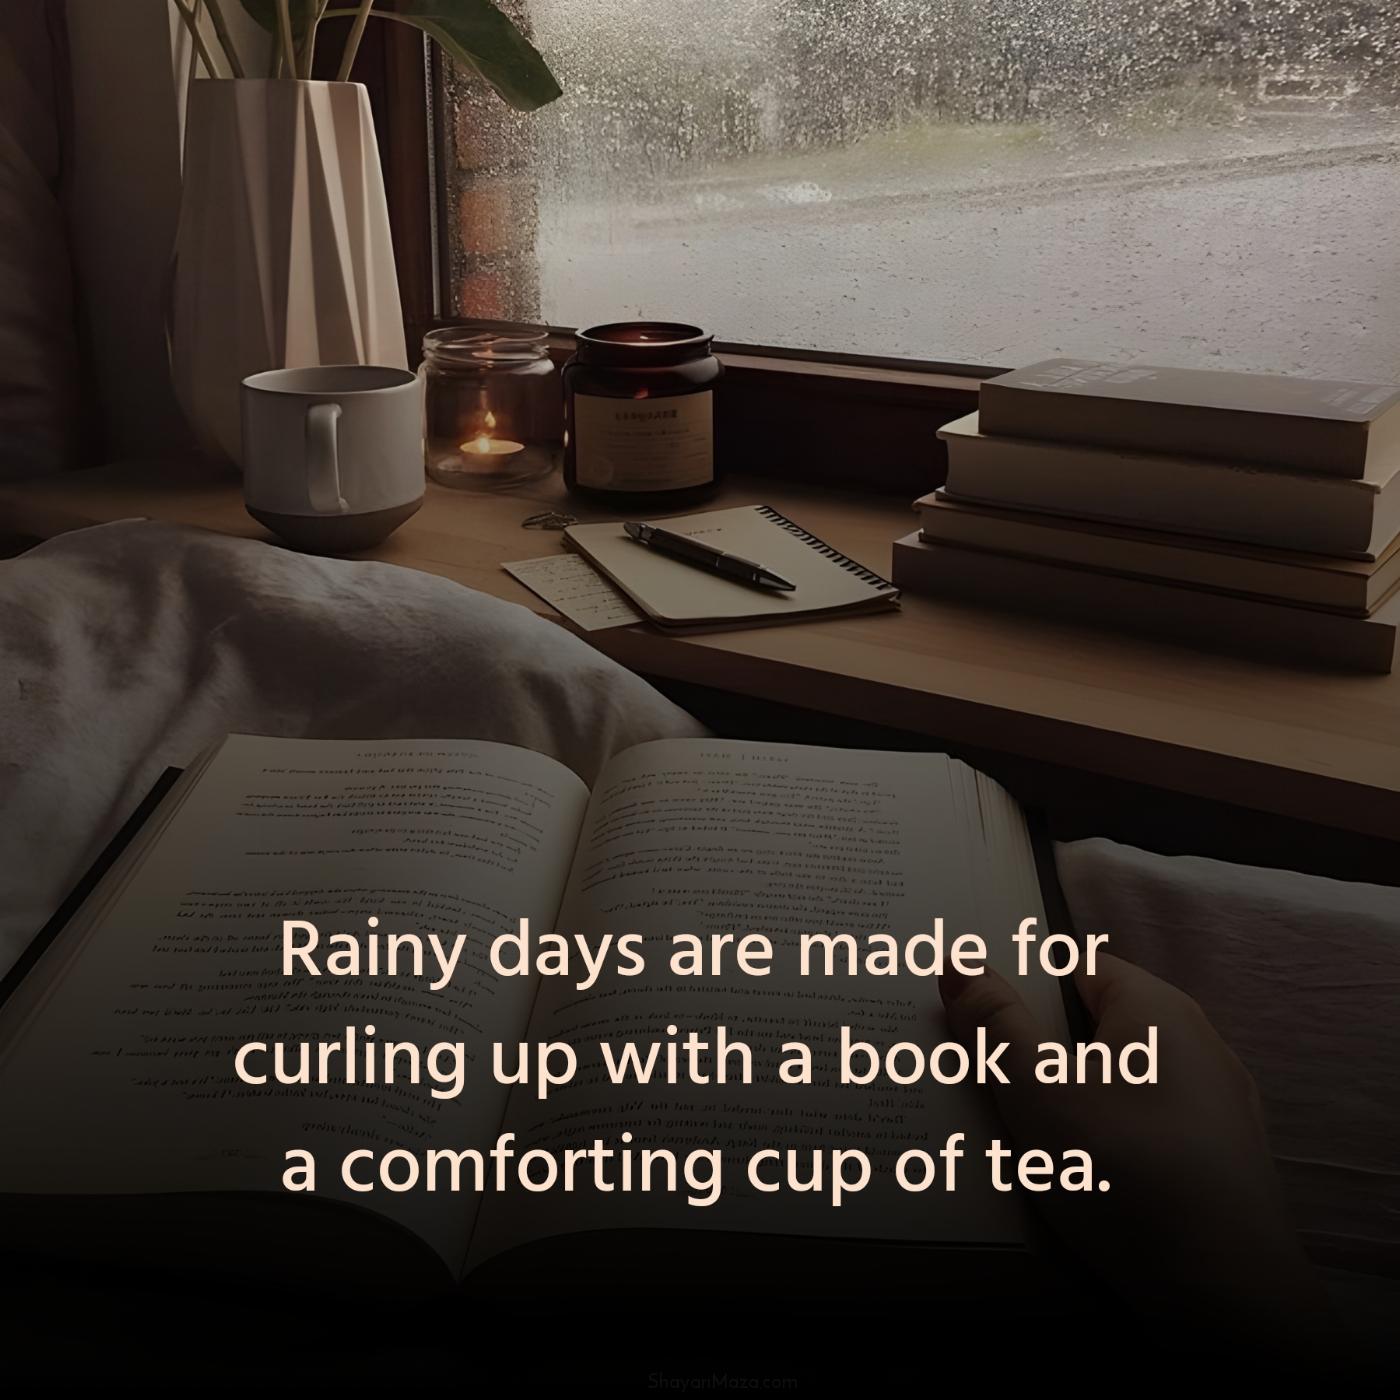 Rainy days are made for curling up with a book and a comforting cup of tea